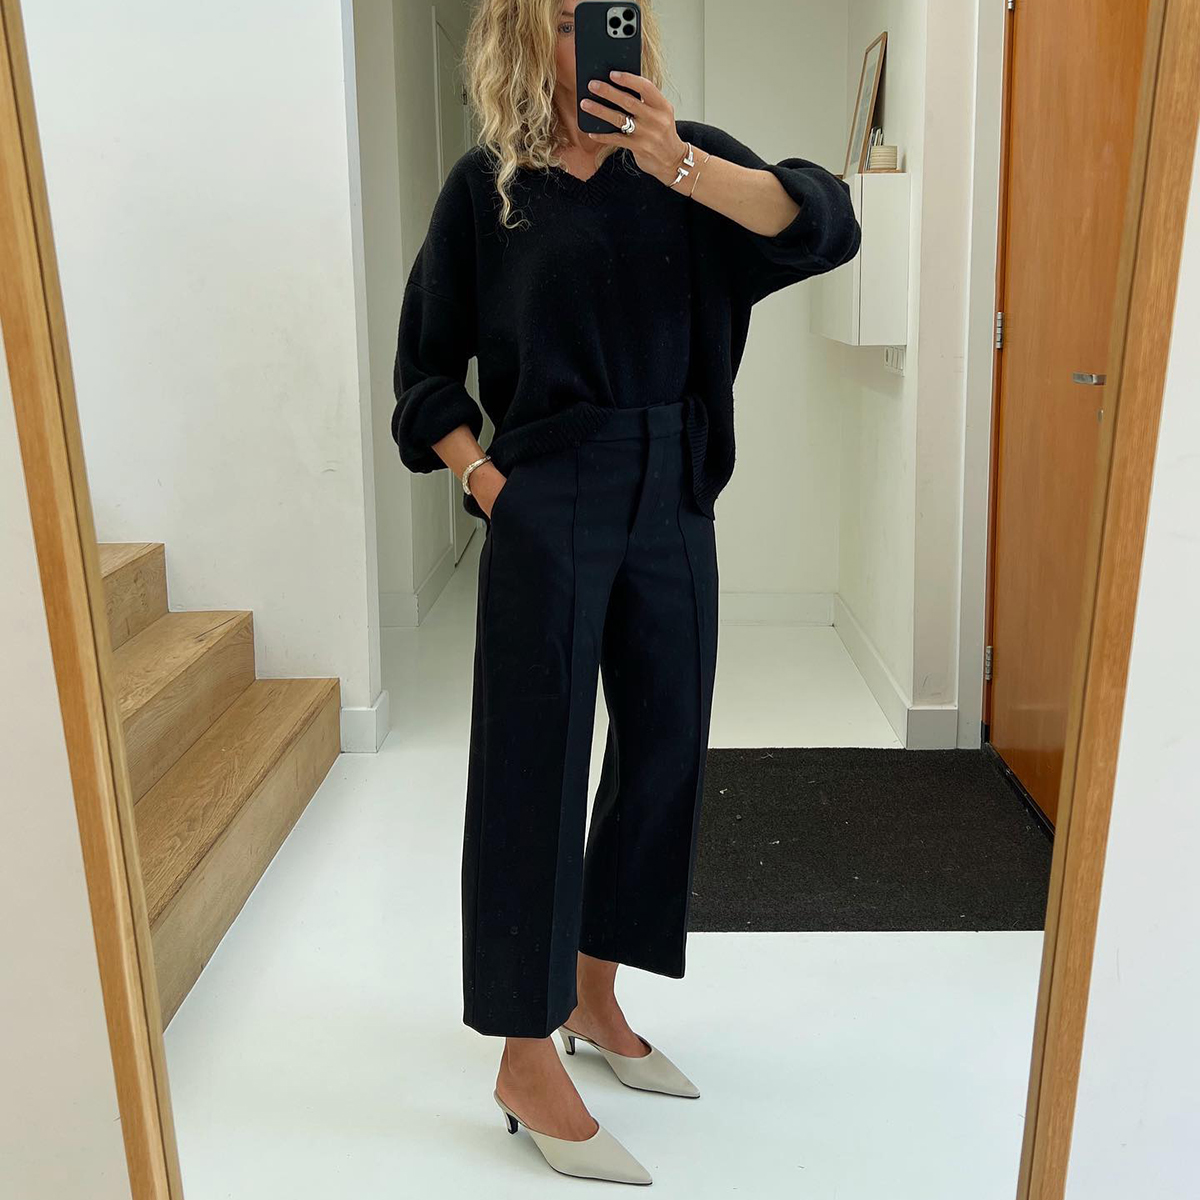 Top Tips to Wear Capris and Cropped Trousers - Bespoke Image